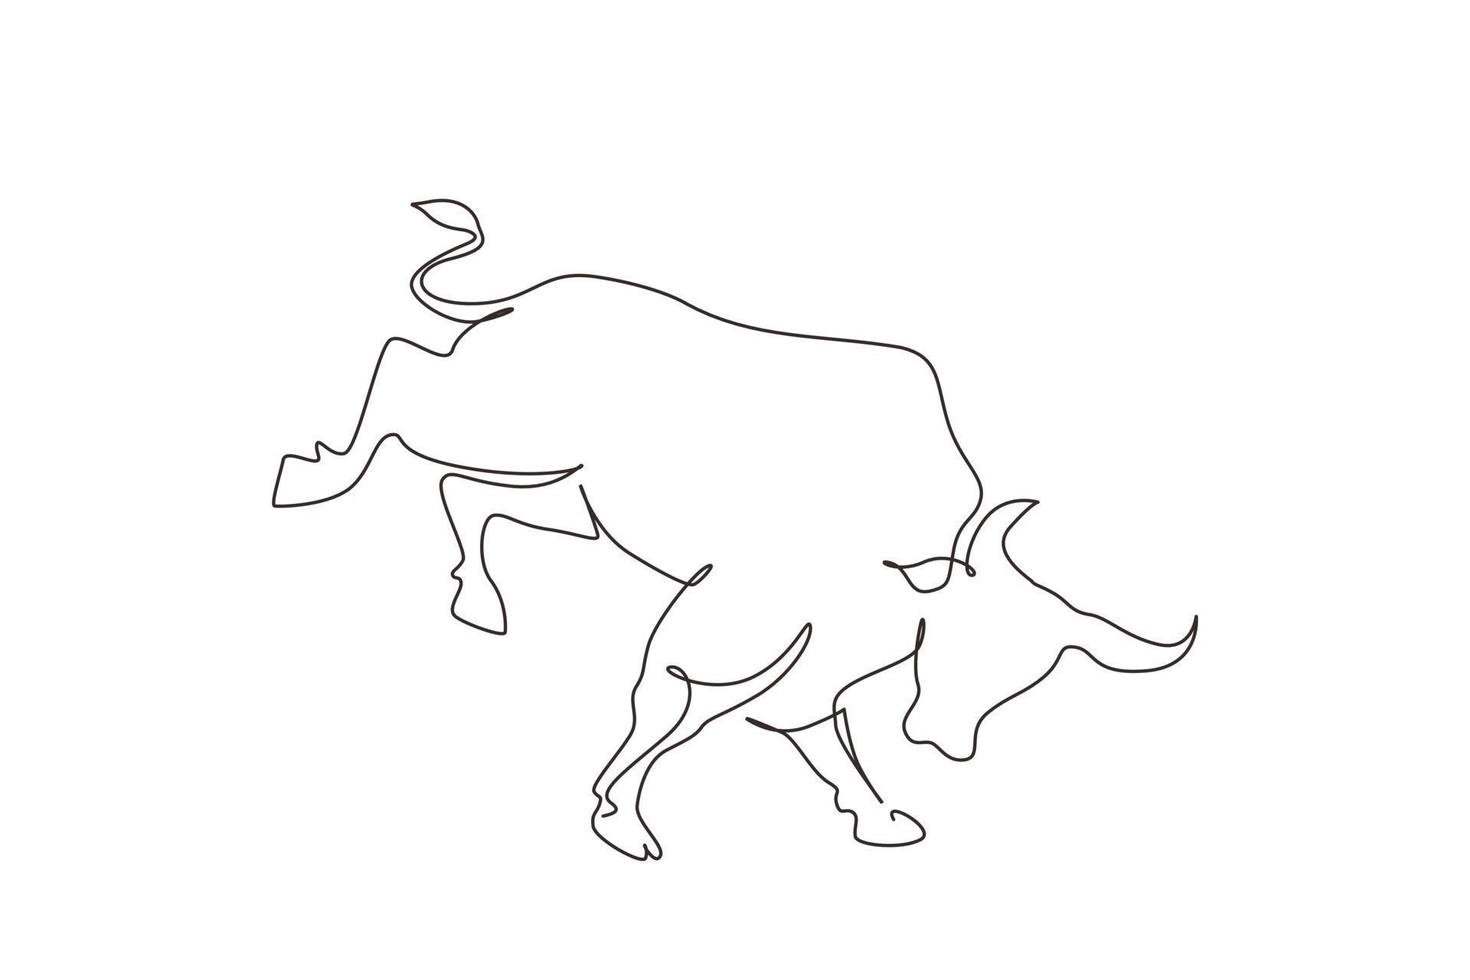 Single continuous line drawing wild bull attack. Elegance buffalo for conservation national park logo identity. Big strong bull mascot concept for rodeo show. One line draw graphic design vector